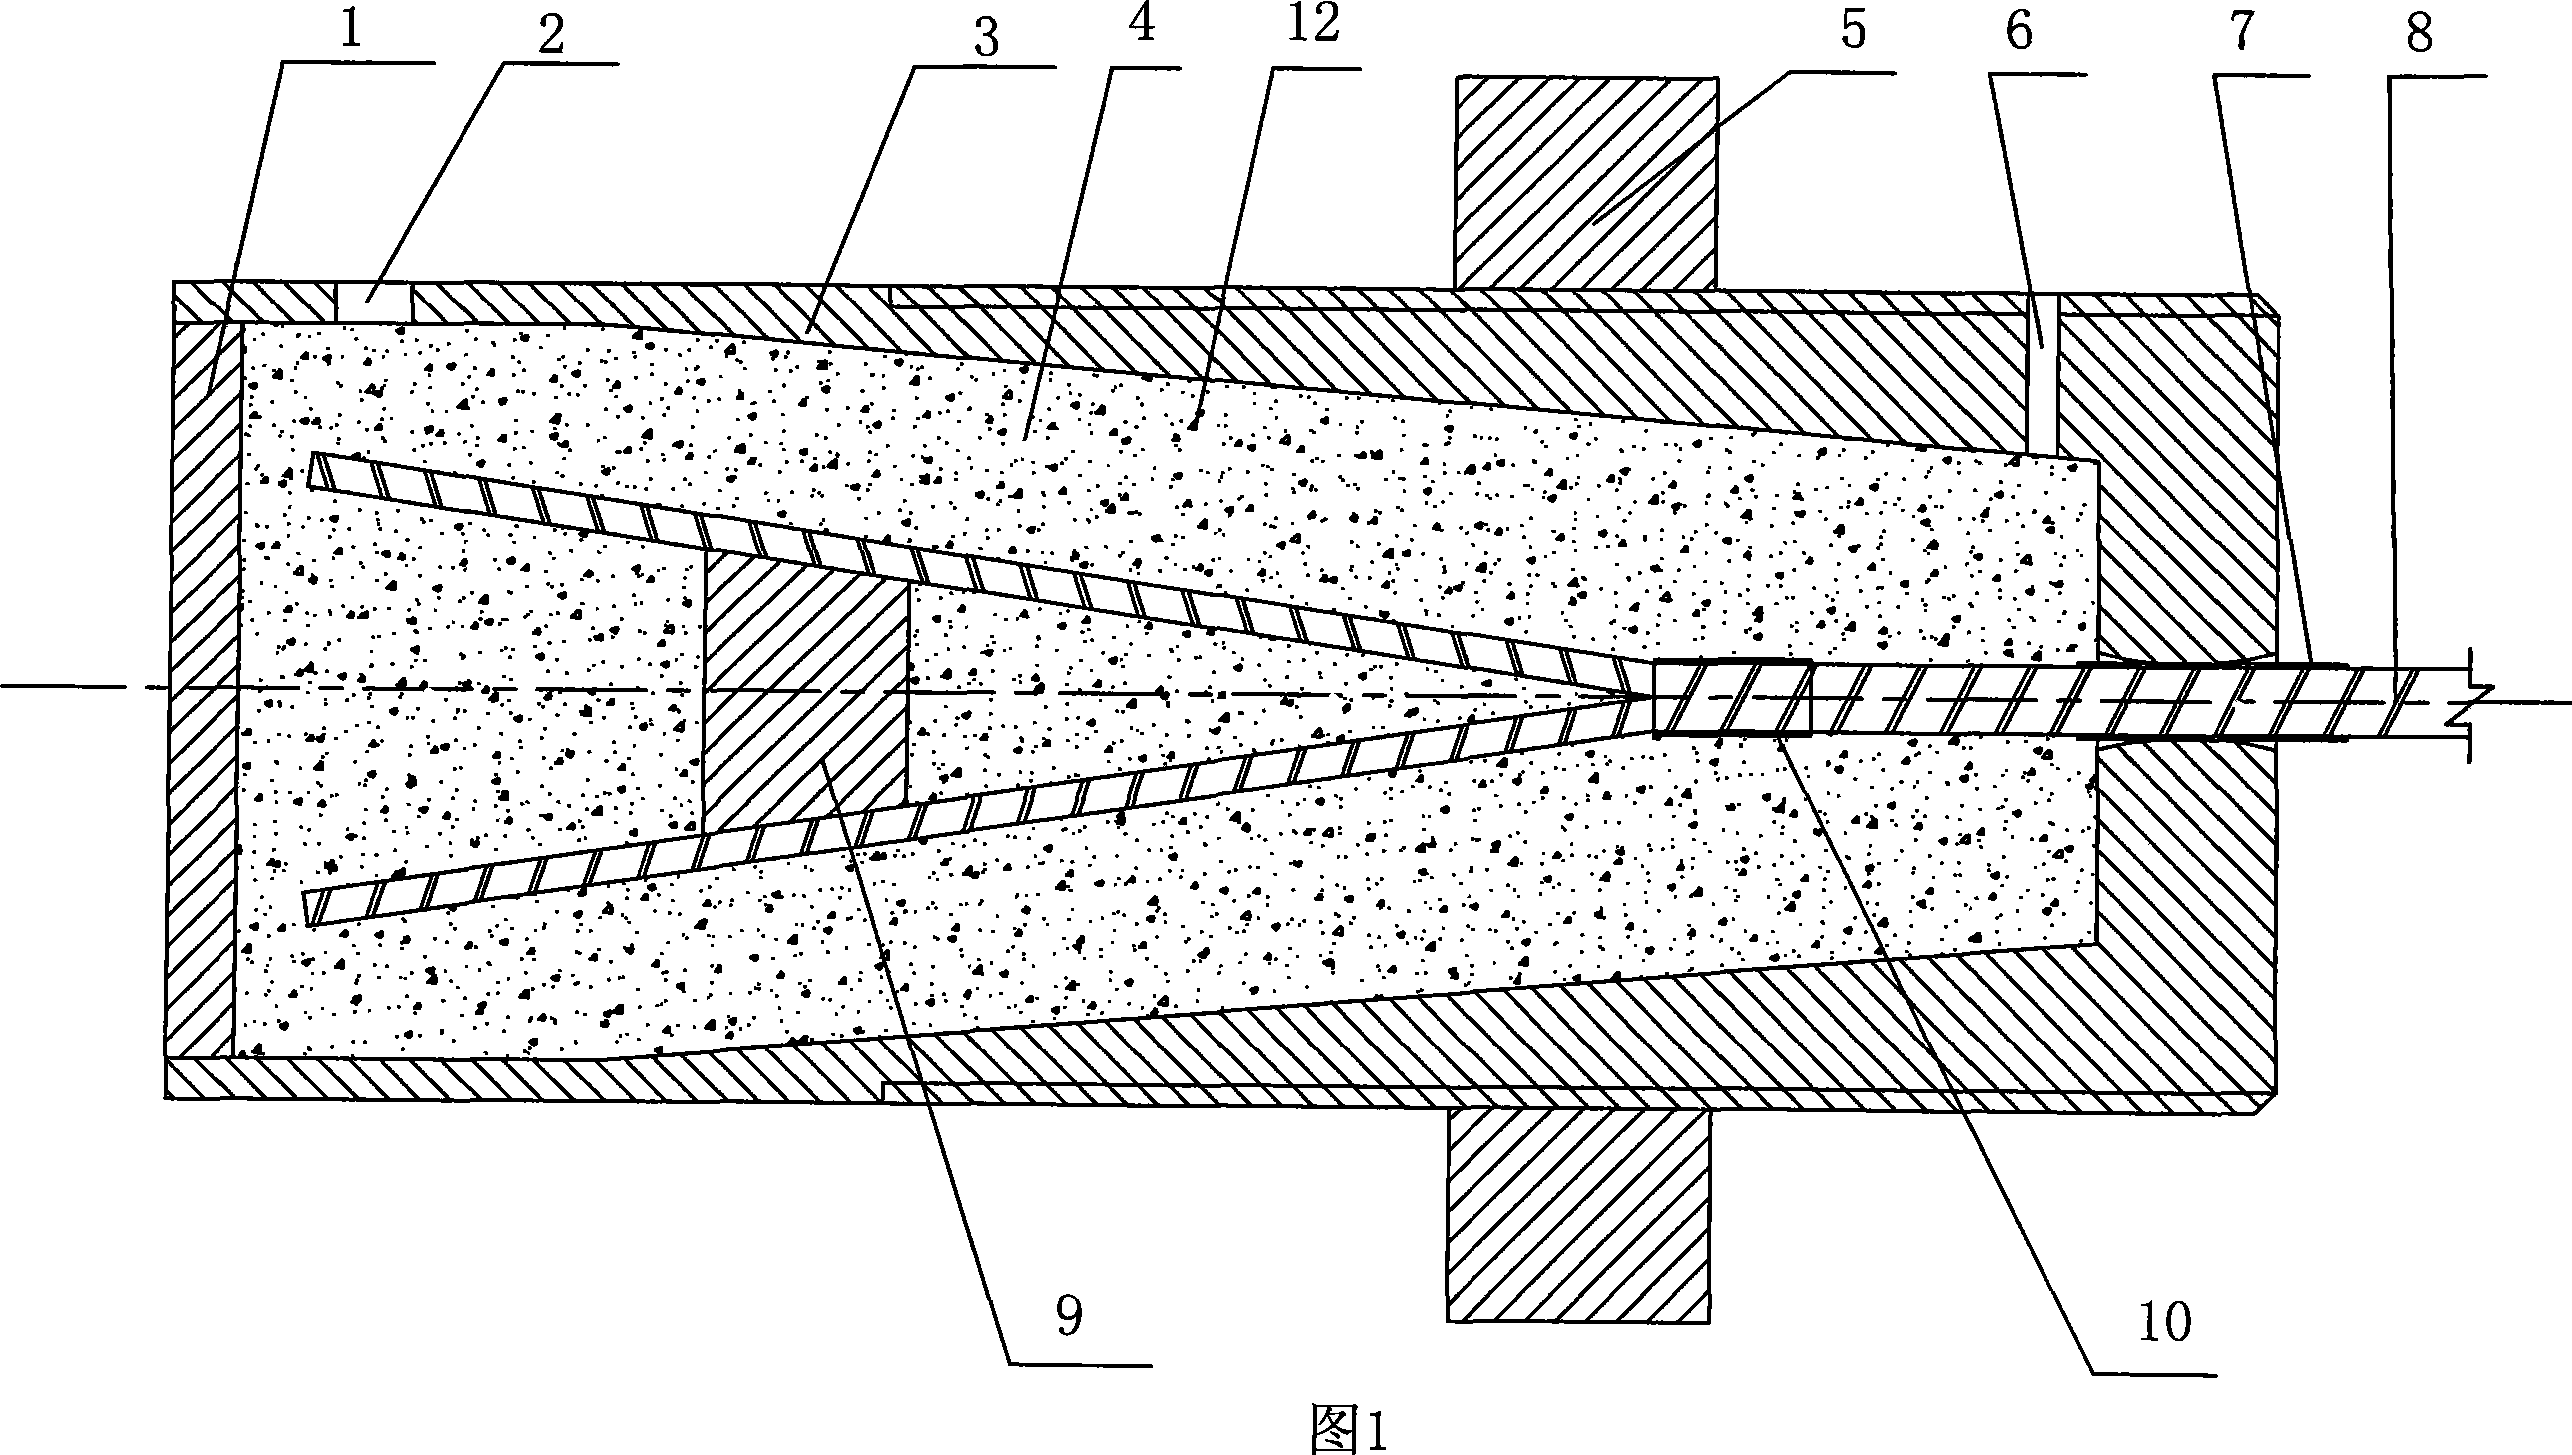 Bond type anchorage and anchoring method for anchoring fibre reinforced plastic reinforcement or bracing cable